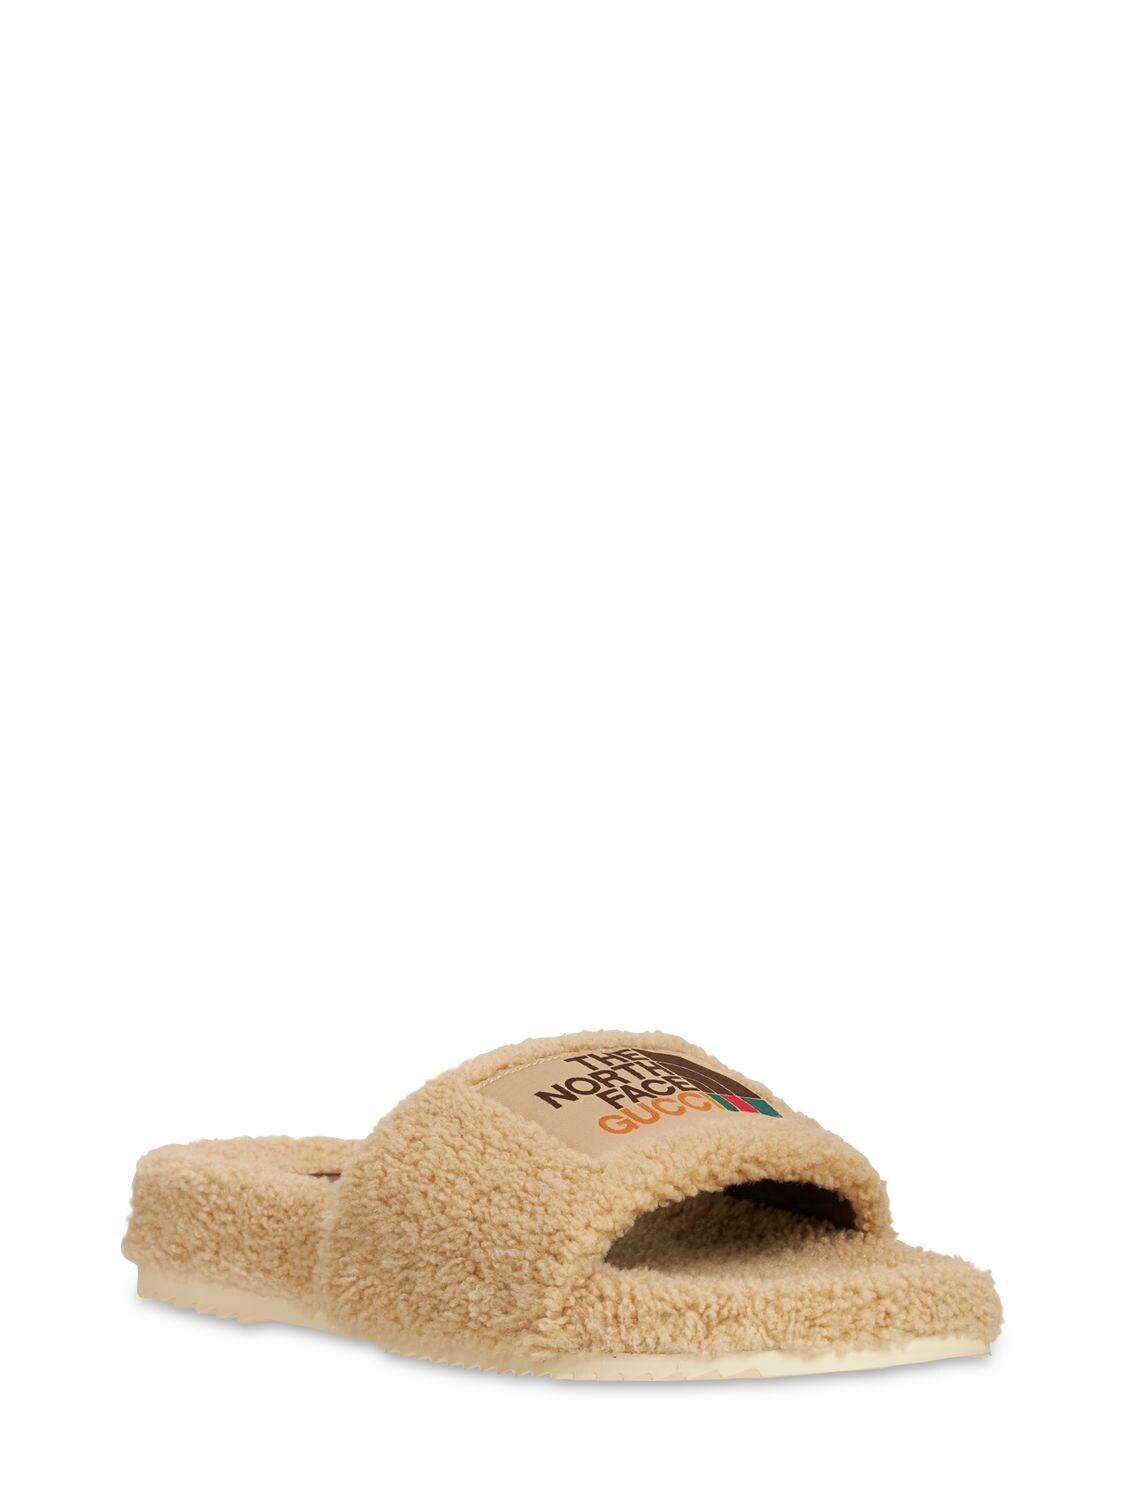 Gucci X The North Face Wool Slide Sandals for Men | Lyst